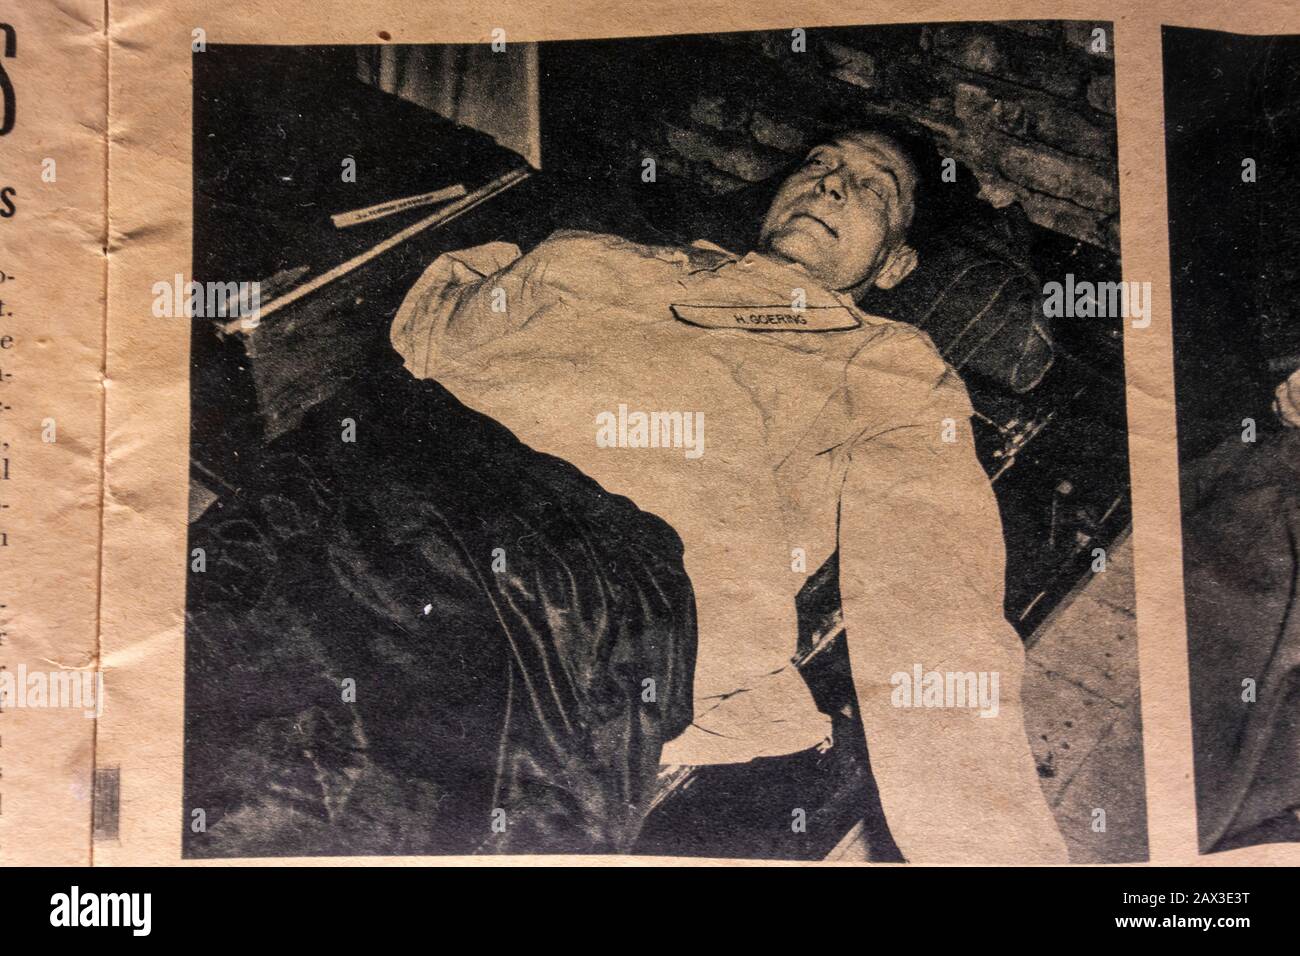 Photo of War Crimes Nazi leader Hermann Goring post-suicide, Documentation Center Nazi Party Rally Grounds, Nuremberg, Bavaria, Germany. Stock Photo